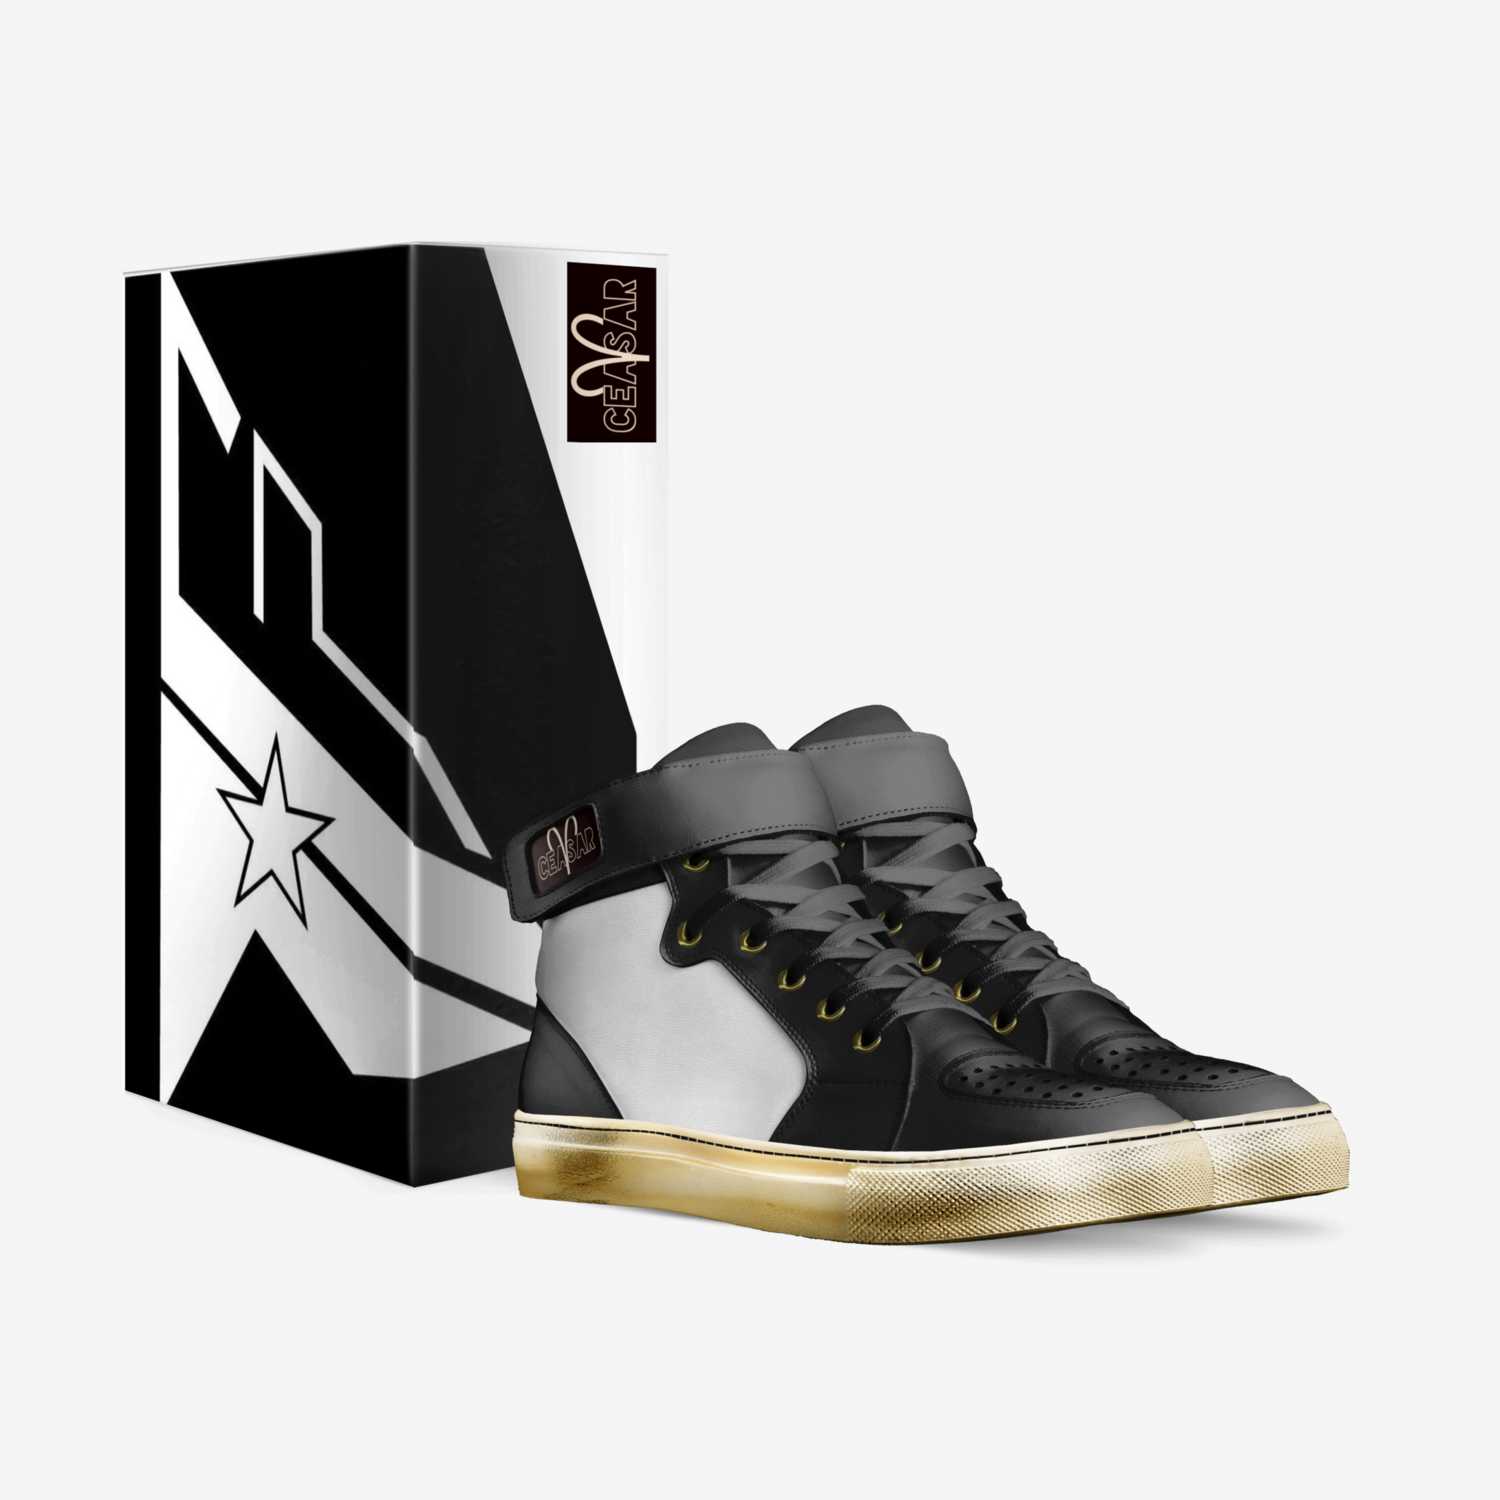 Ceasar custom made in Italy shoes by Talor Fiit | Box view